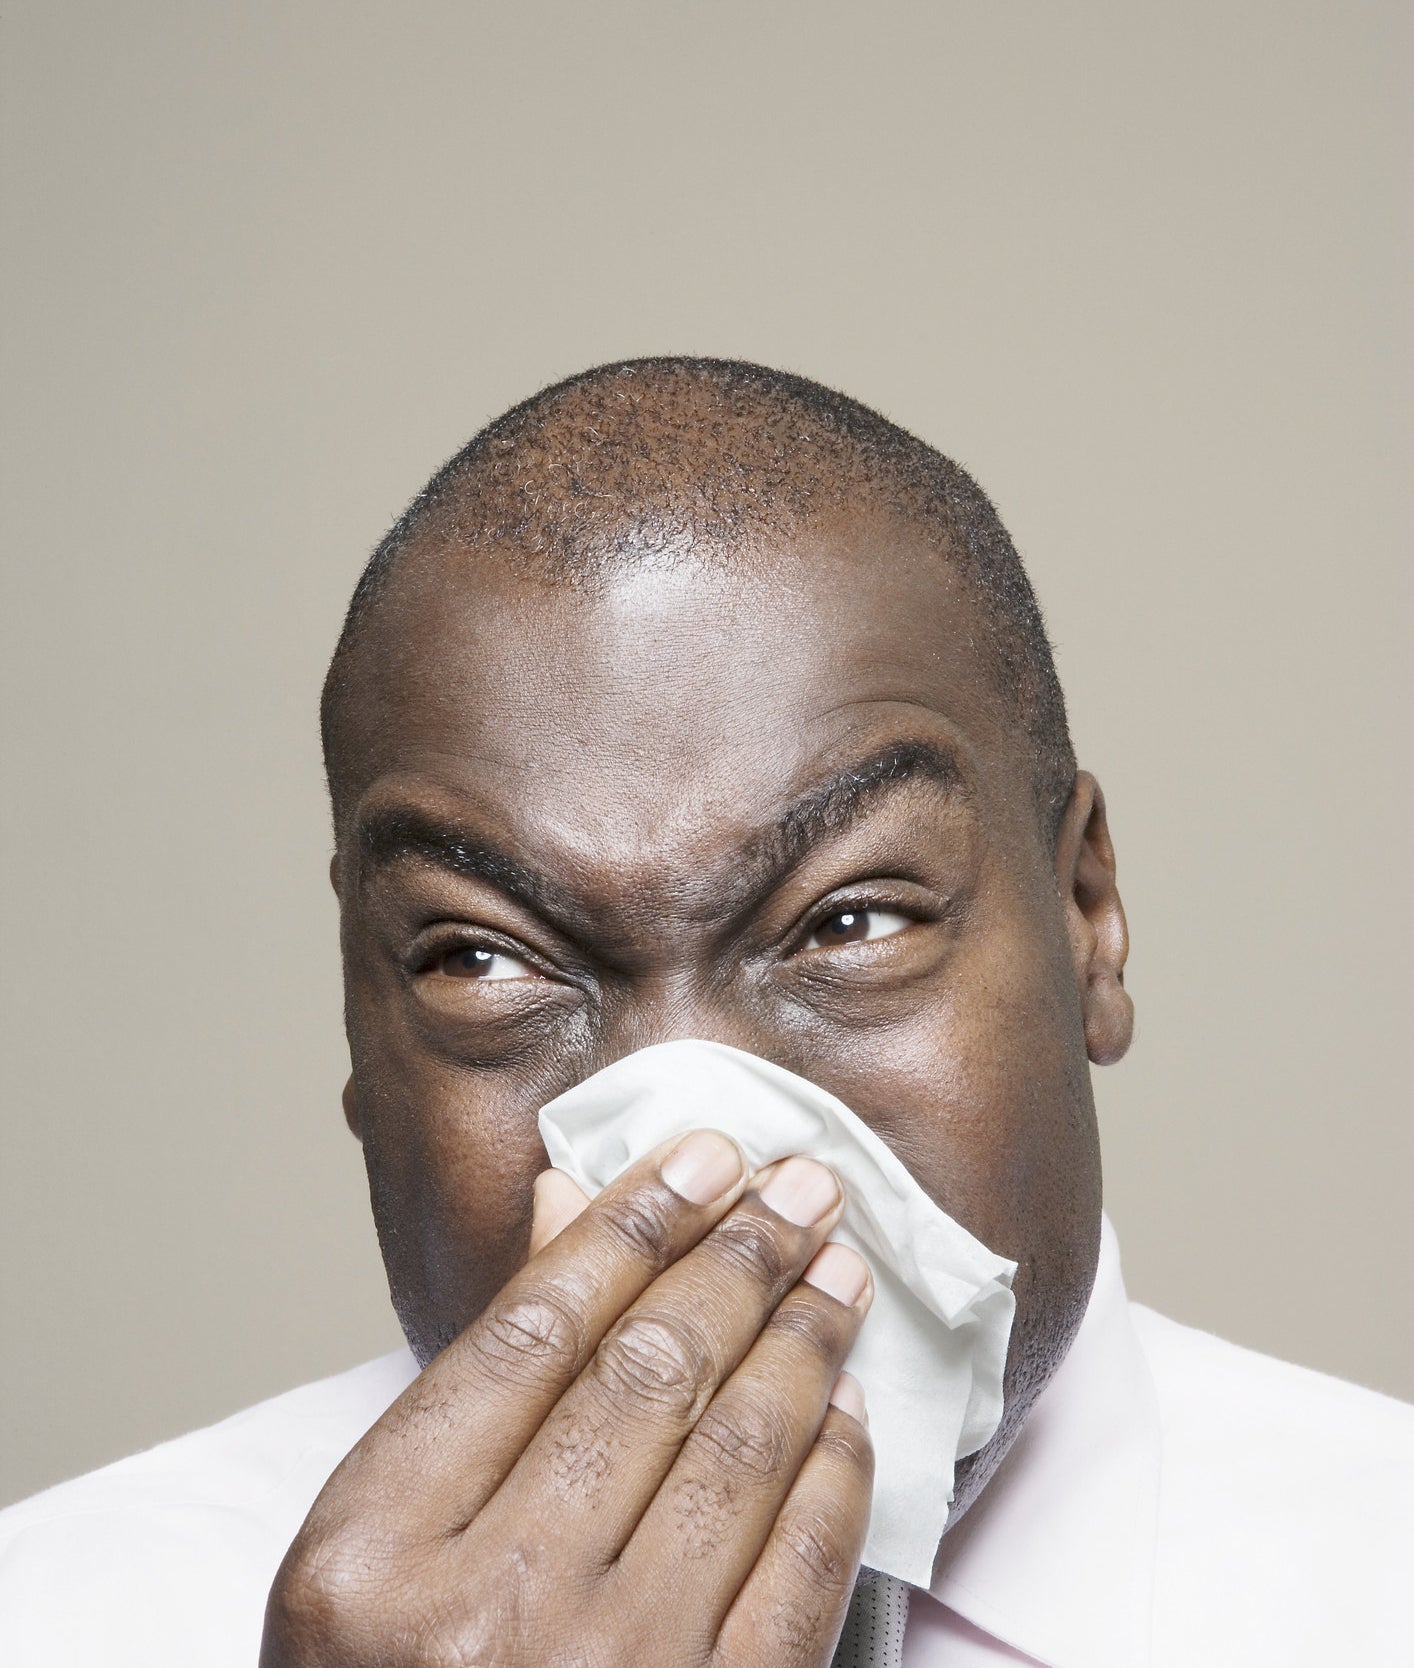 A man blowing his nose